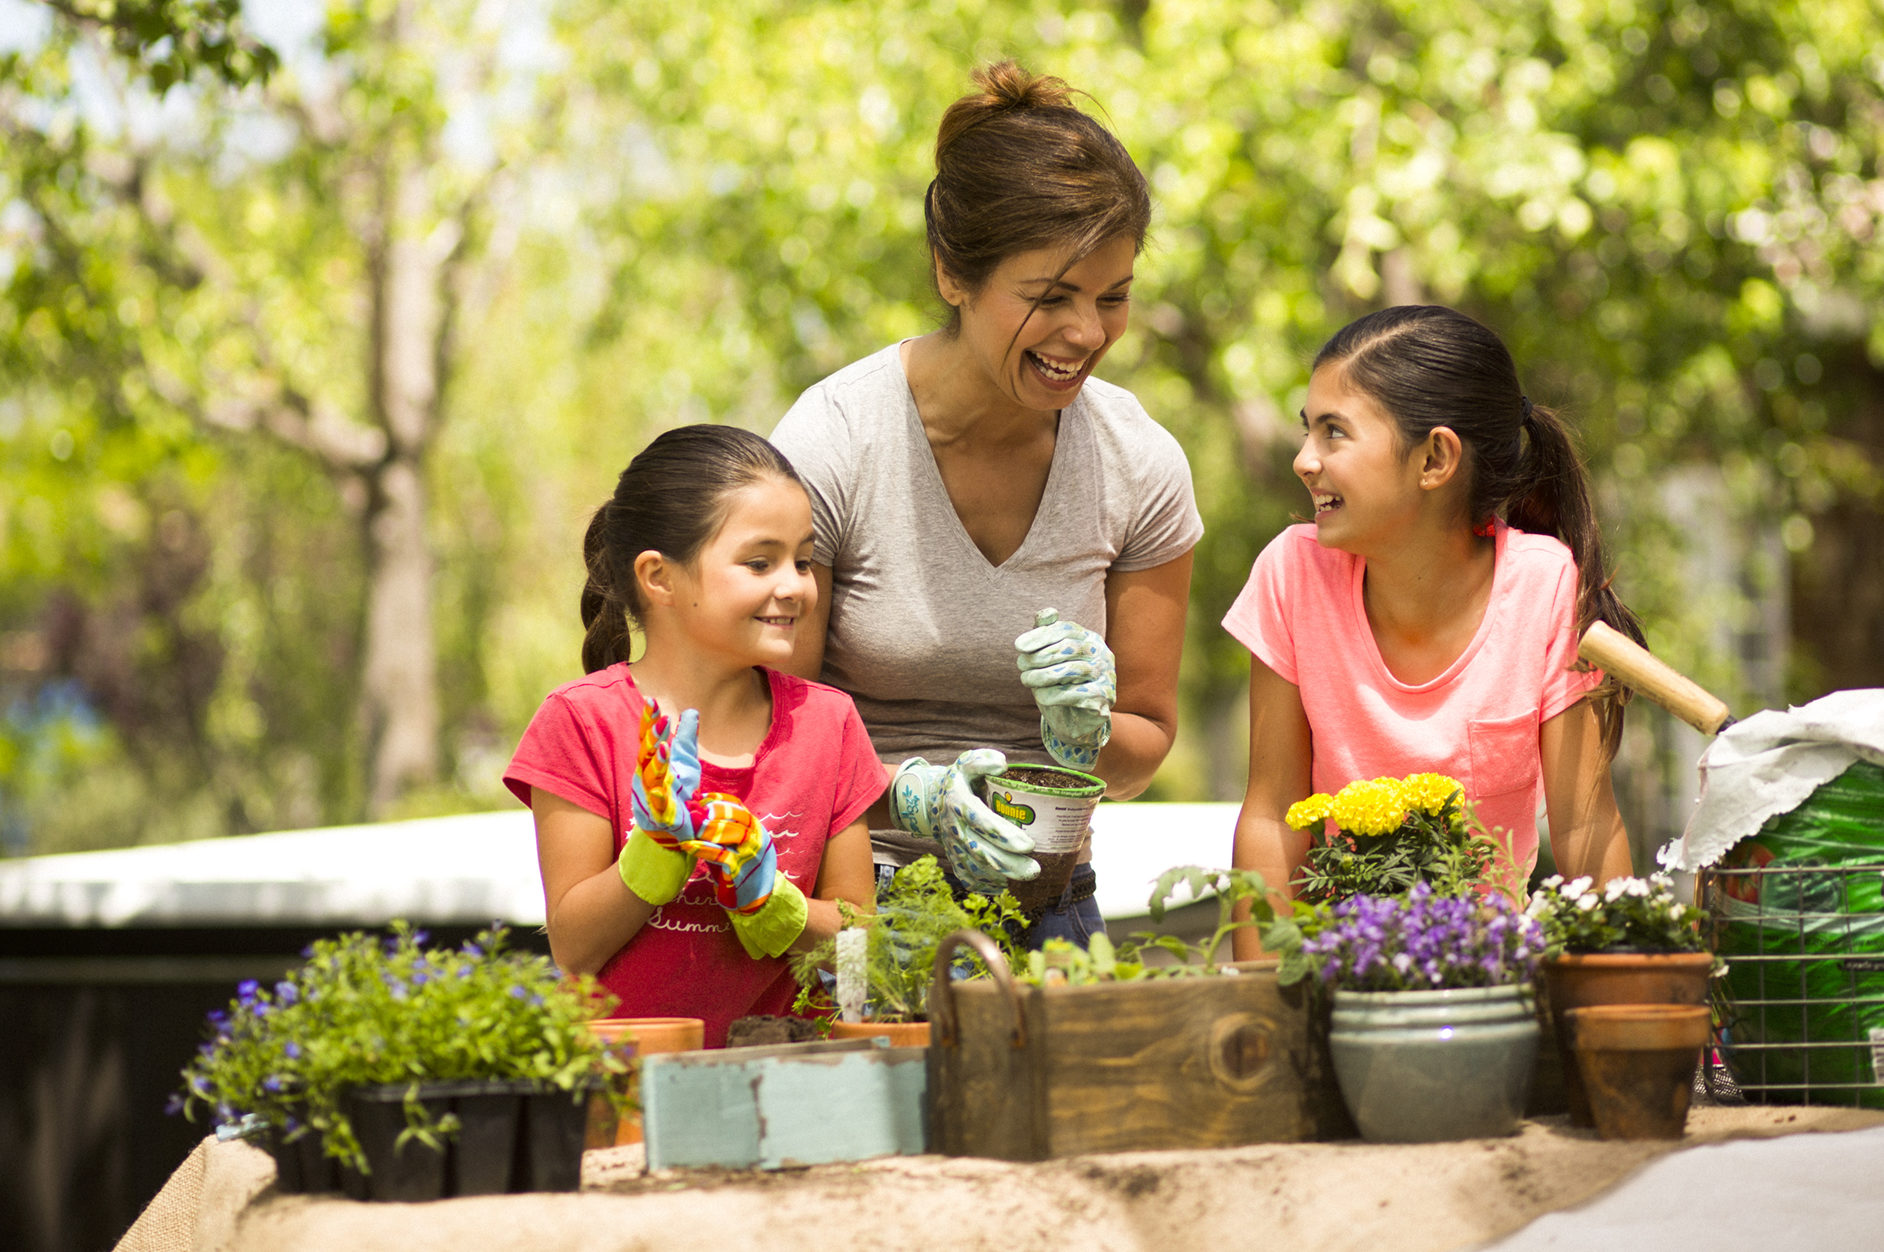 3 ways Families and friends can enjoy health and wellness together